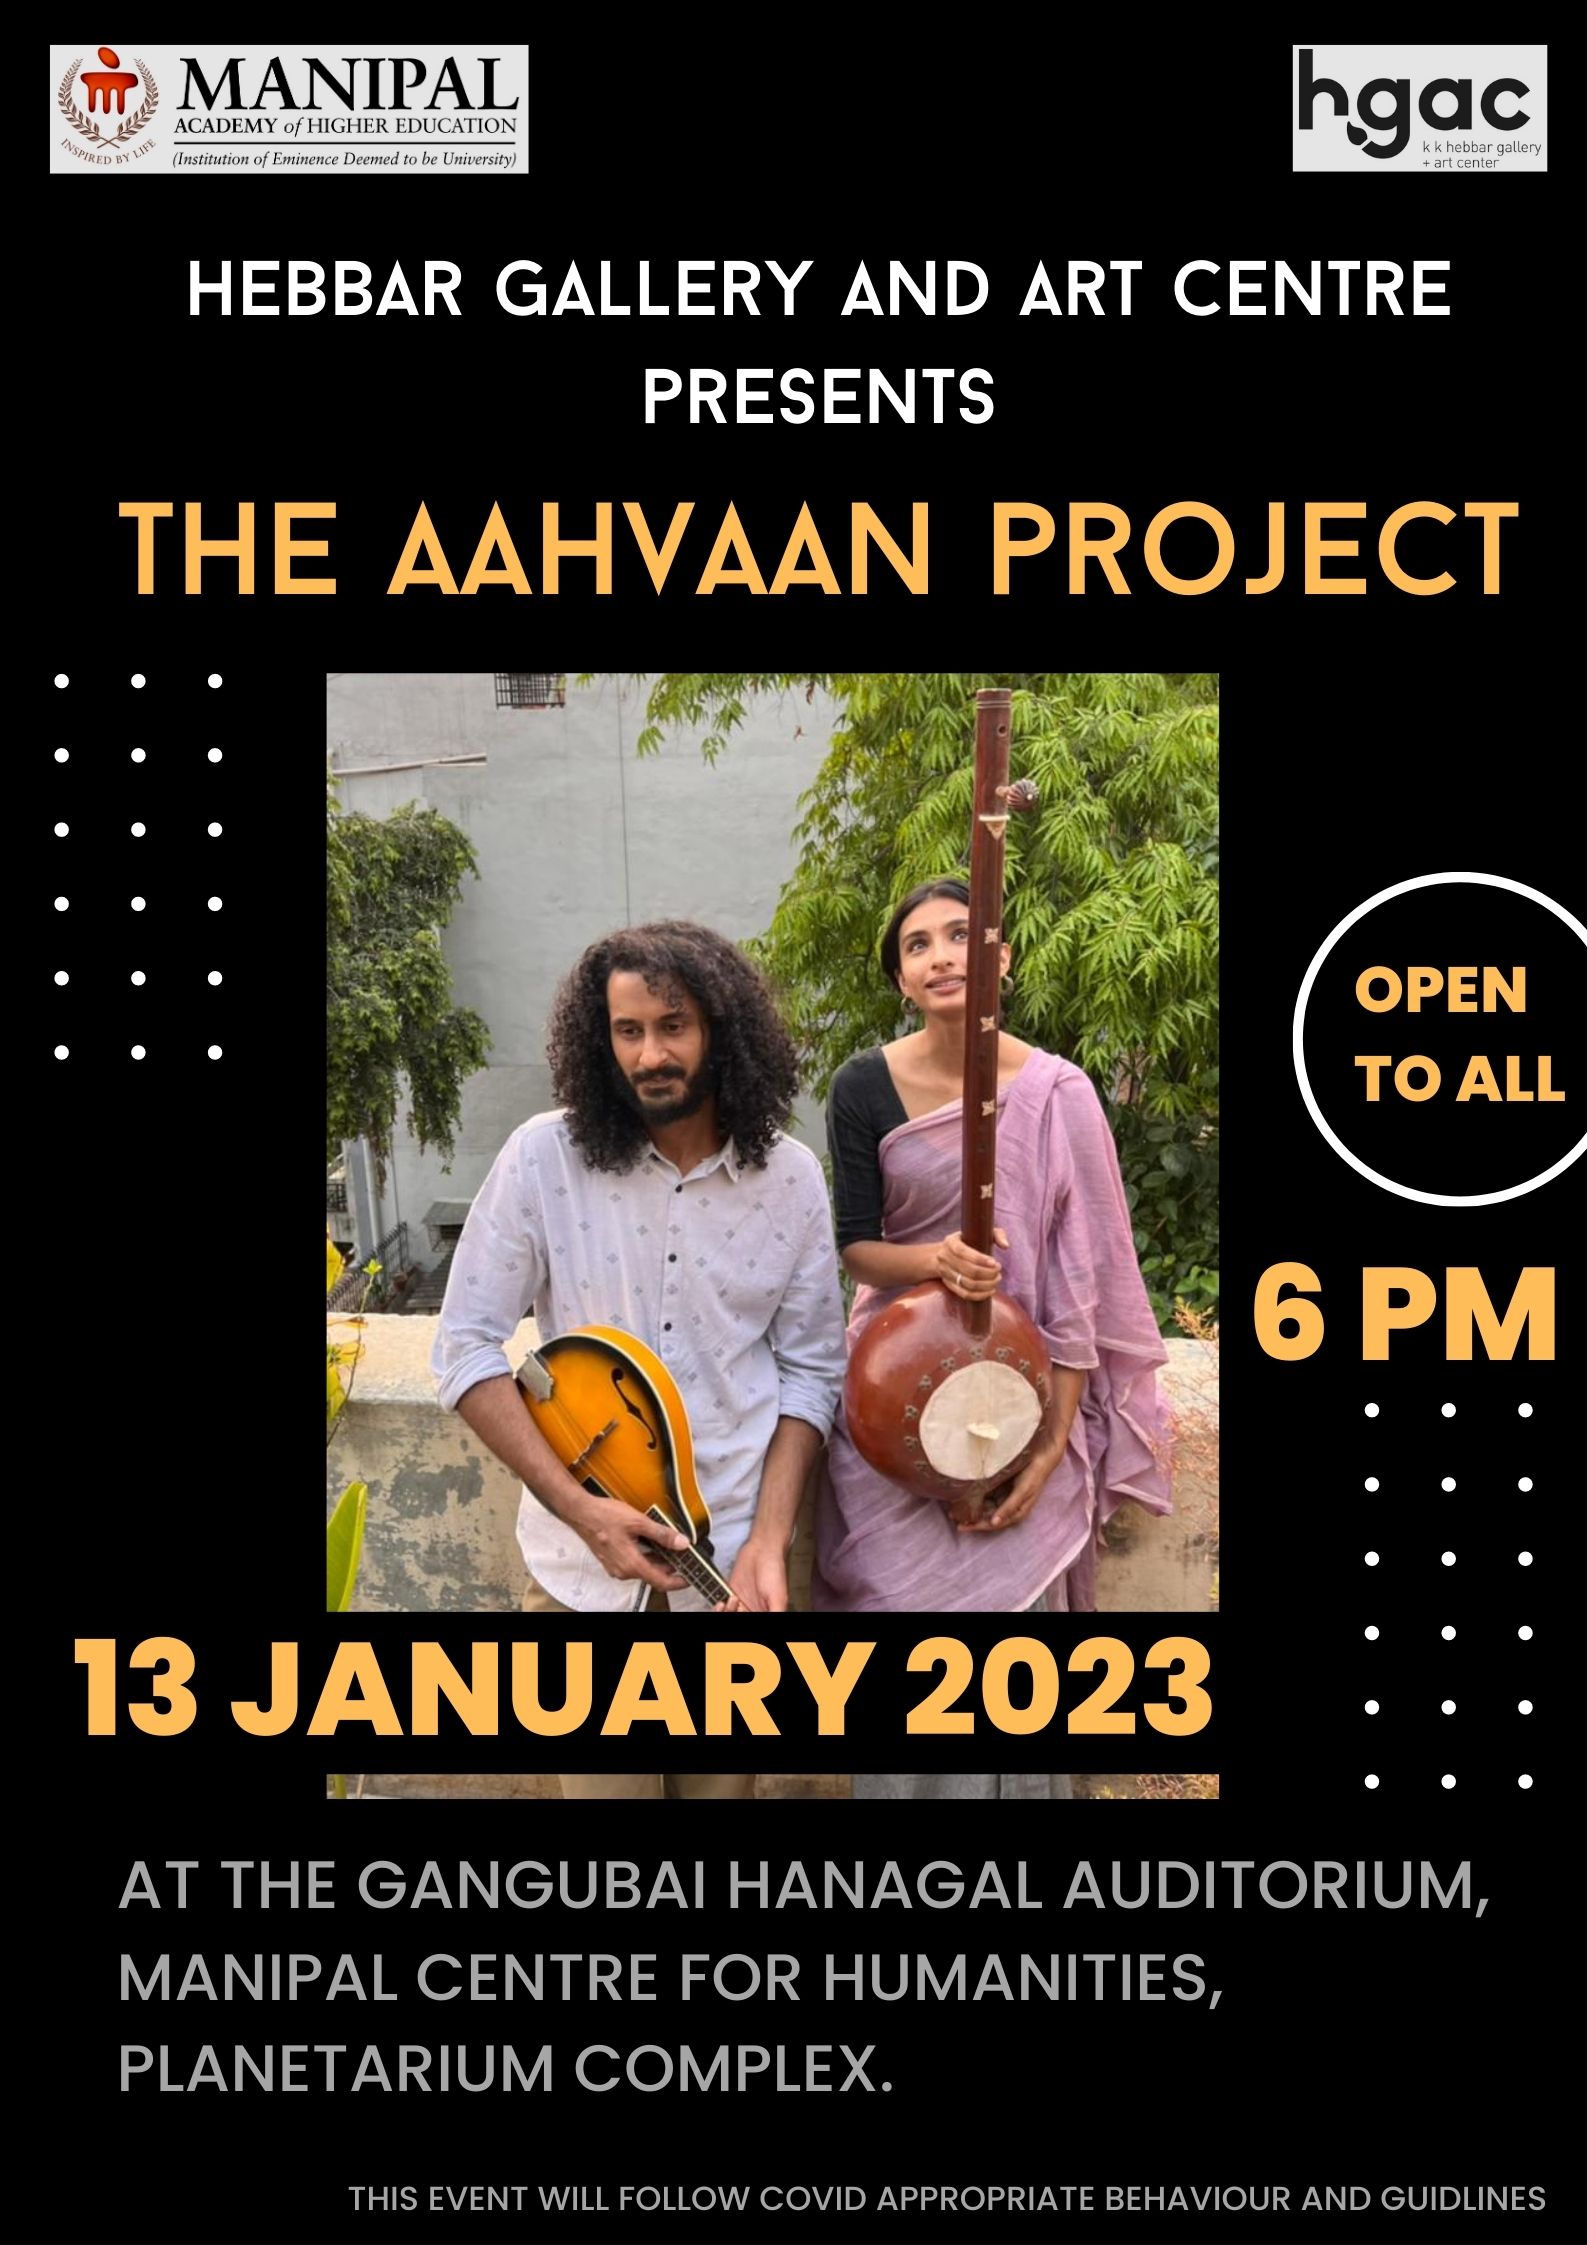 Hebbar Gallery and Art Centre to host a musical performance by the Aahvaan Project